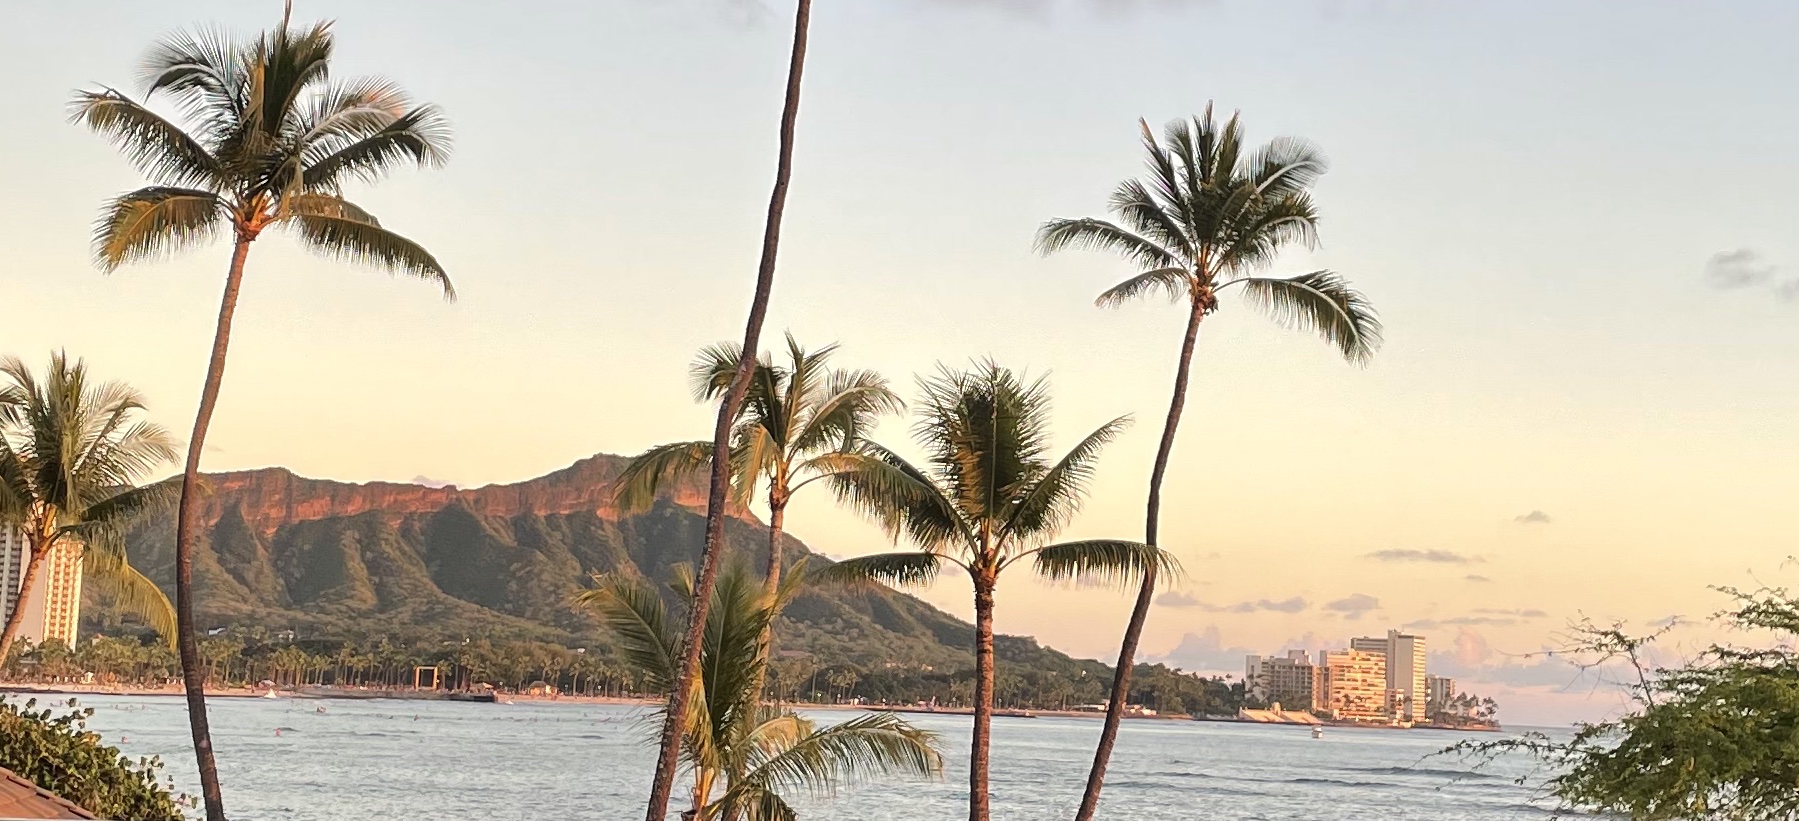 What to do in Oahu?